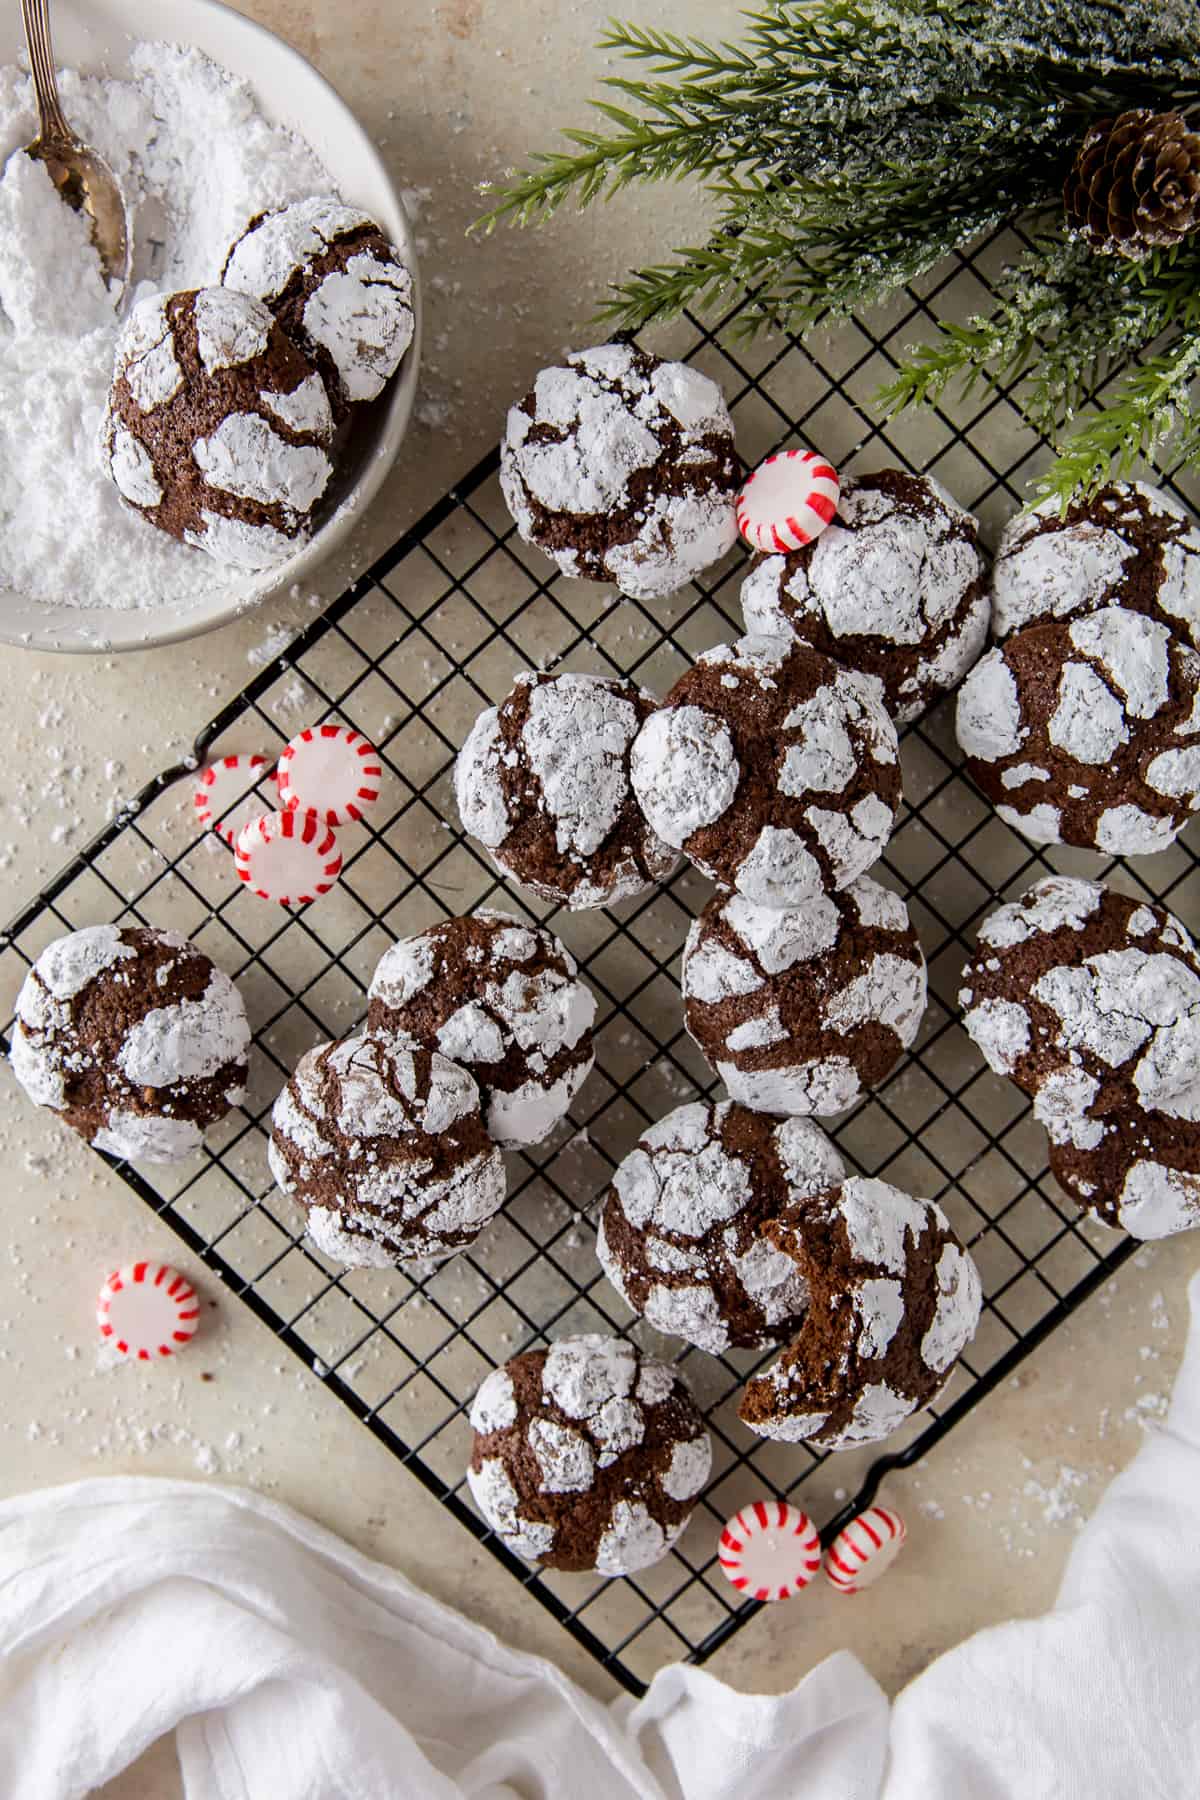 Chocolate Peppermint Crinkles on a wire rack with peppermint candies.